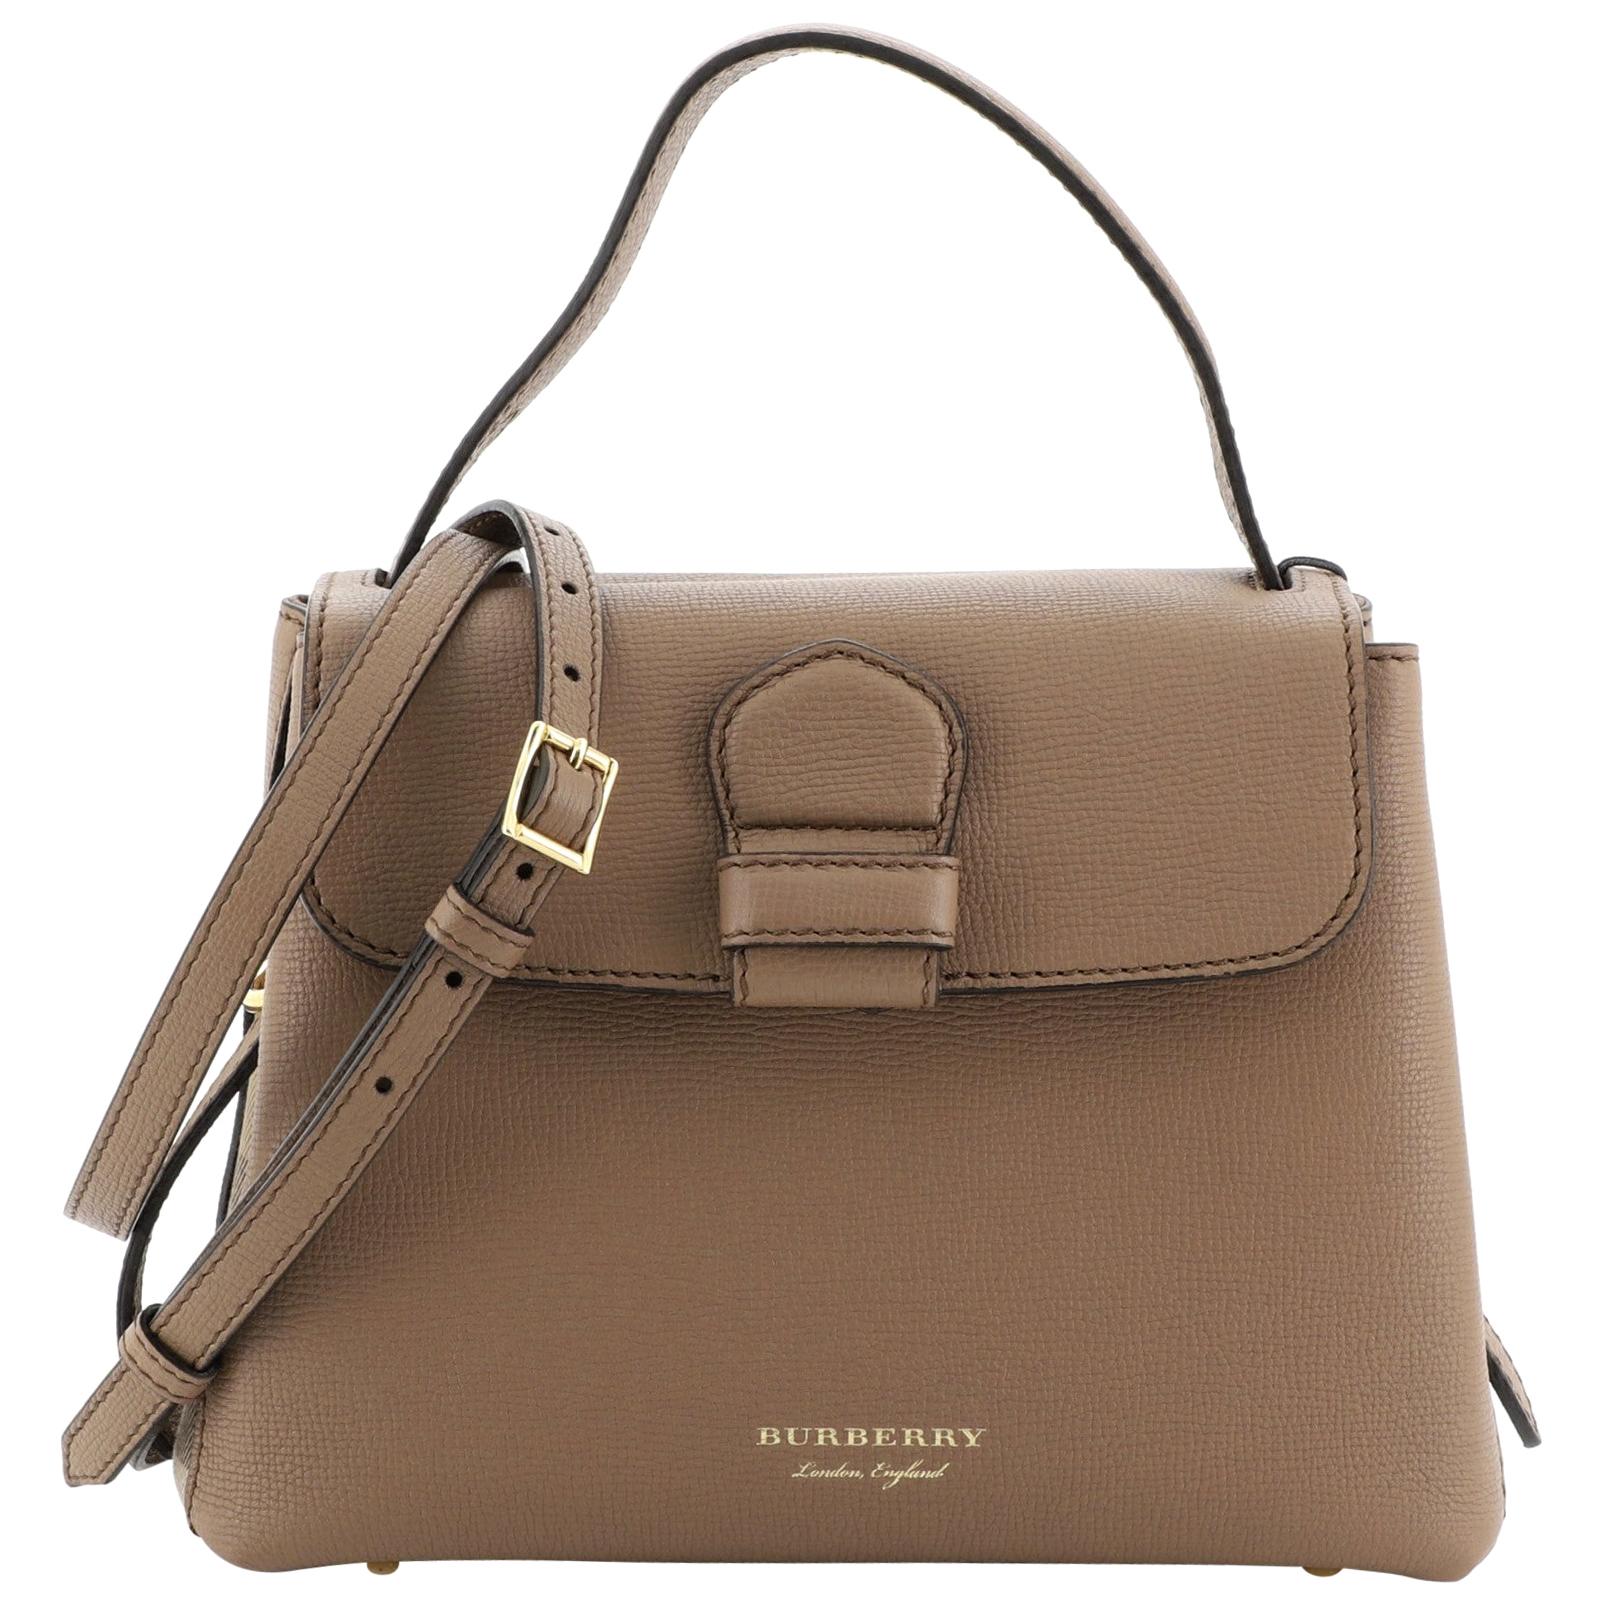 Burberry Camberley Small Bag Best Sale - partnerservizi.it 1694349824